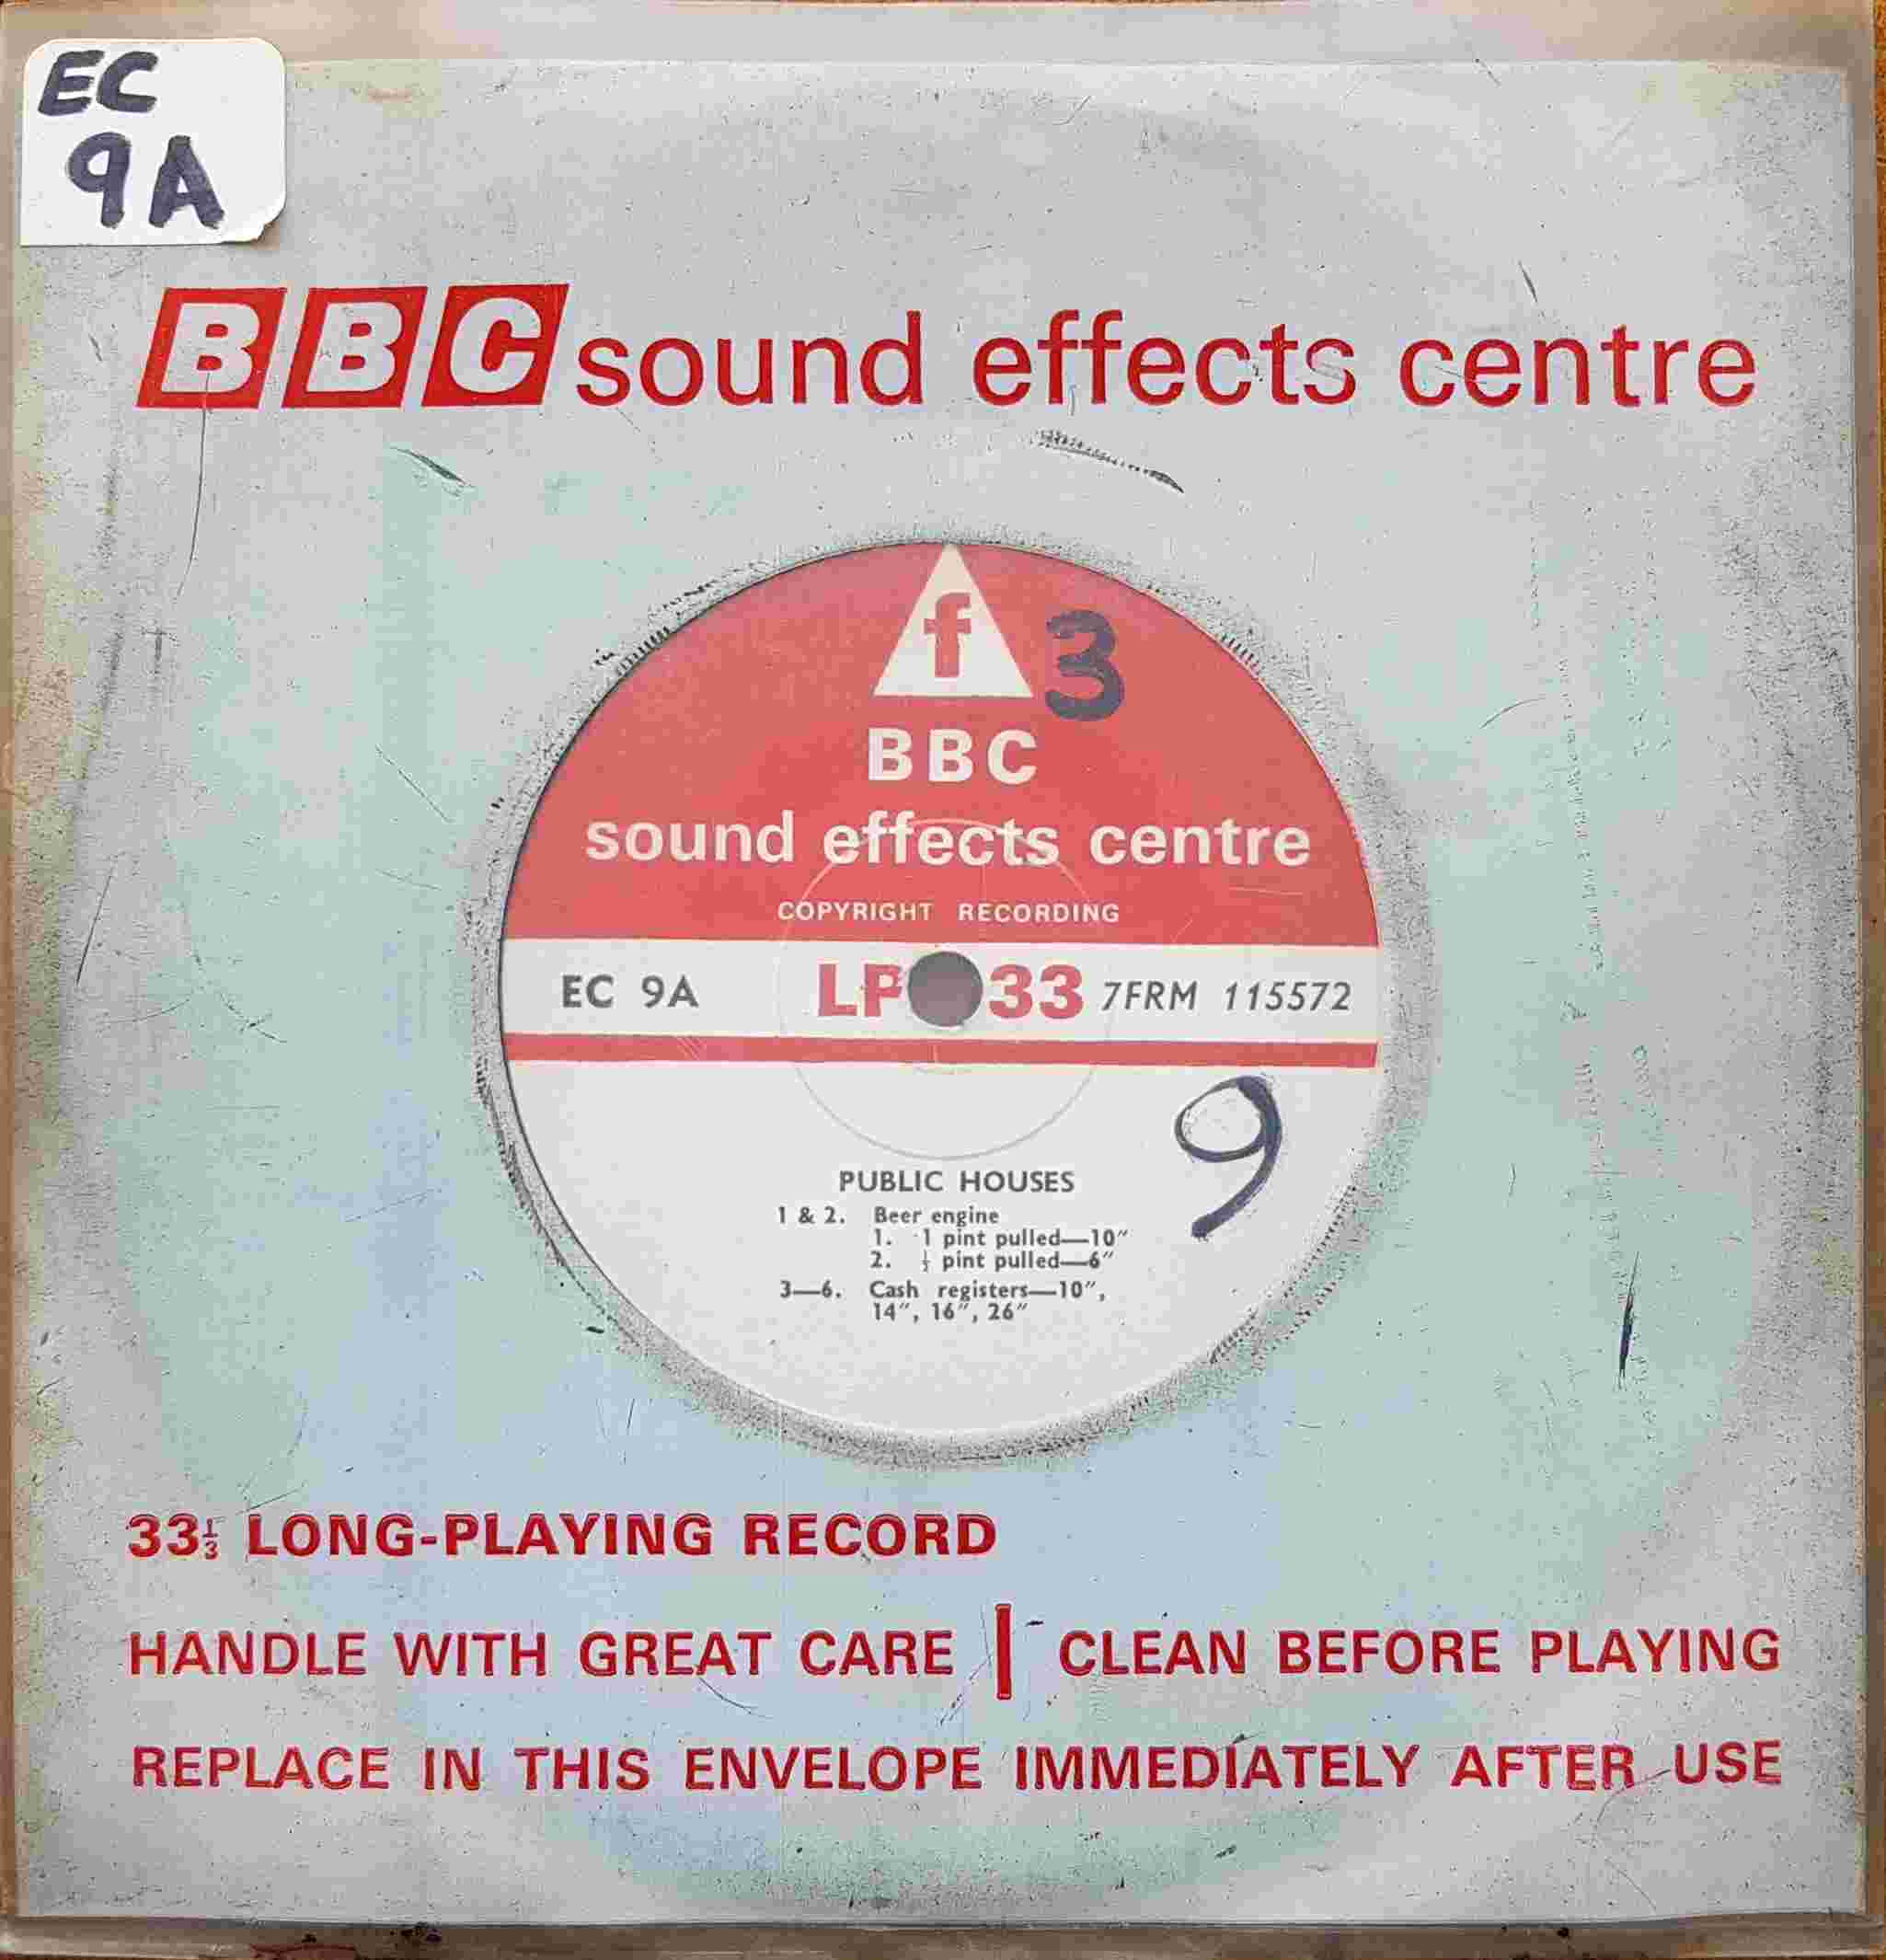 Picture of EC 9A Public houses single by artist Not registered from the BBC records and Tapes library